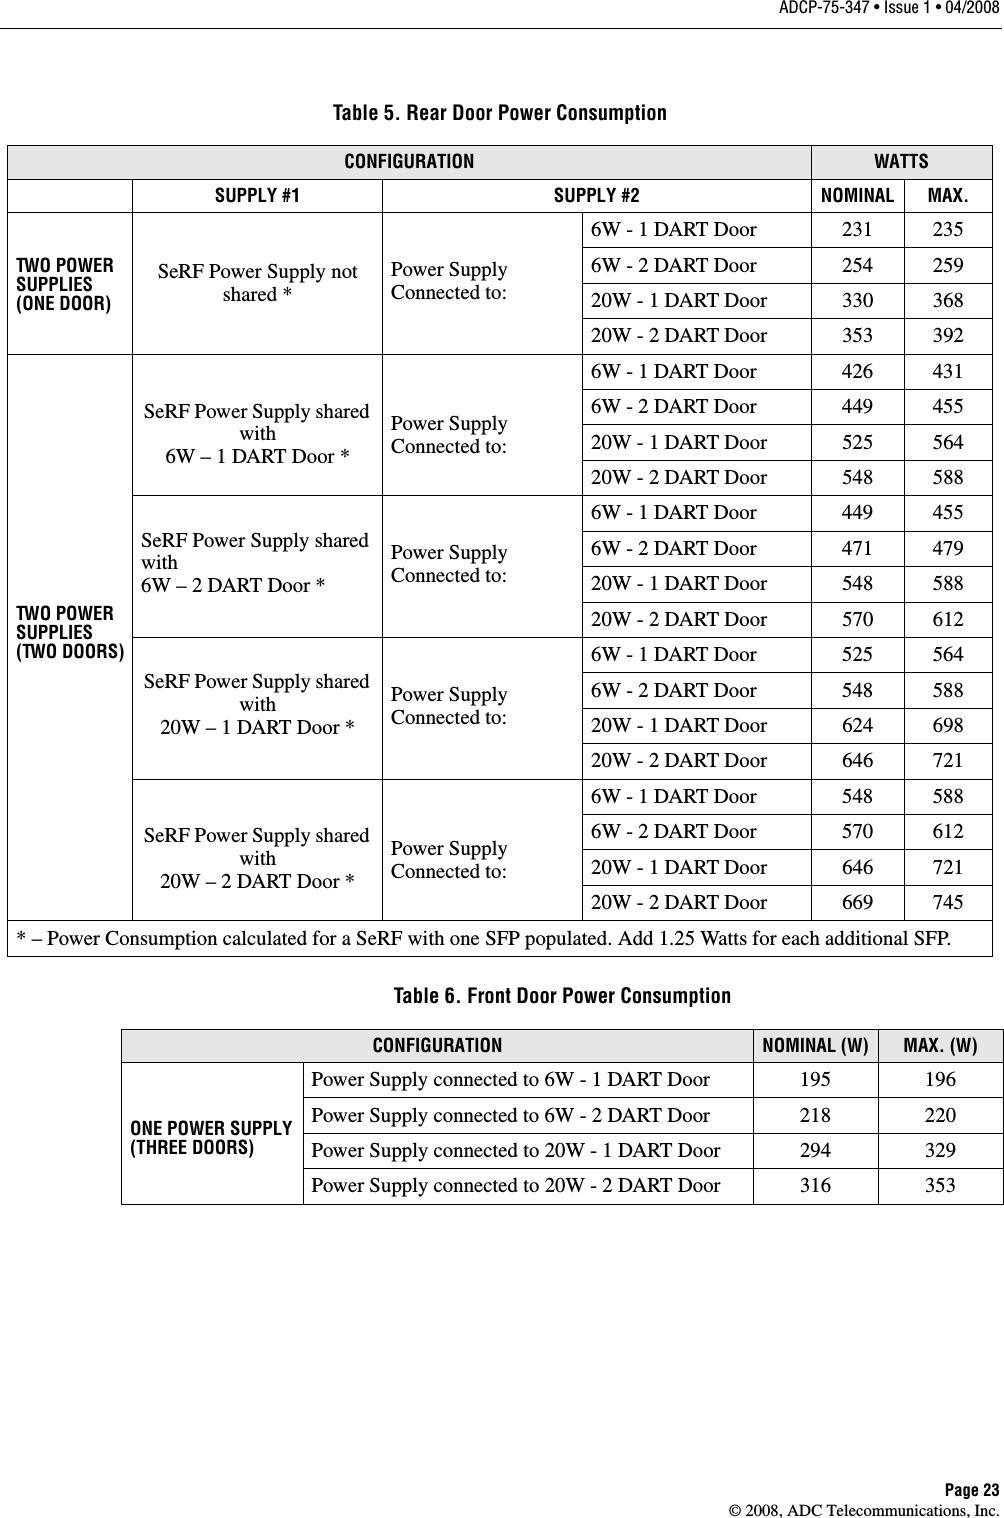 ADCP-75-347 • Issue 1 • 04/2008Page 23© 2008, ADC Telecommunications, Inc.Table 5. Rear Door Power ConsumptionCONFIGURATION WATTSSUPPLY #1 SUPPLY #2 NOMINAL MAX.TWO POWER SUPPLIES (ONE DOOR)SeRF Power Supply not shared *Power Supply  Connected to:6W - 1 DART Door 231 2356W - 2 DART Door 254 25920W - 1 DART Door 330 36820W - 2 DART Door 353 392TWO POWER SUPPLIES (TWO DOORS)SeRF Power Supply shared with 6W – 1 DART Door *Power Supply  Connected to:6W - 1 DART Door 426 4316W - 2 DART Door 449 45520W - 1 DART Door 525 56420W - 2 DART Door 548 588SeRF Power Supply shared with  6W – 2 DART Door *Power Supply  Connected to:6W - 1 DART Door 449 4556W - 2 DART Door 471 47920W - 1 DART Door 548 58820W - 2 DART Door 570 612SeRF Power Supply shared with 20W – 1 DART Door *Power Supply  Connected to:6W - 1 DART Door 525 5646W - 2 DART Door 548 58820W - 1 DART Door 624 69820W - 2 DART Door 646 721SeRF Power Supply shared with 20W – 2 DART Door *Power Supply  Connected to:6W - 1 DART Door 548 5886W - 2 DART Door 570 61220W - 1 DART Door 646 72120W - 2 DART Door 669 745* – Power Consumption calculated for a SeRF with one SFP populated. Add 1.25 Watts for each additional SFP.Table 6. Front Door Power ConsumptionCONFIGURATION NOMINAL (W) MAX. (W)ONE POWER SUPPLY (THREE DOORS)Power Supply connected to 6W - 1 DART Door 195 196Power Supply connected to 6W - 2 DART Door 218 220Power Supply connected to 20W - 1 DART Door 294 329Power Supply connected to 20W - 2 DART Door 316 353